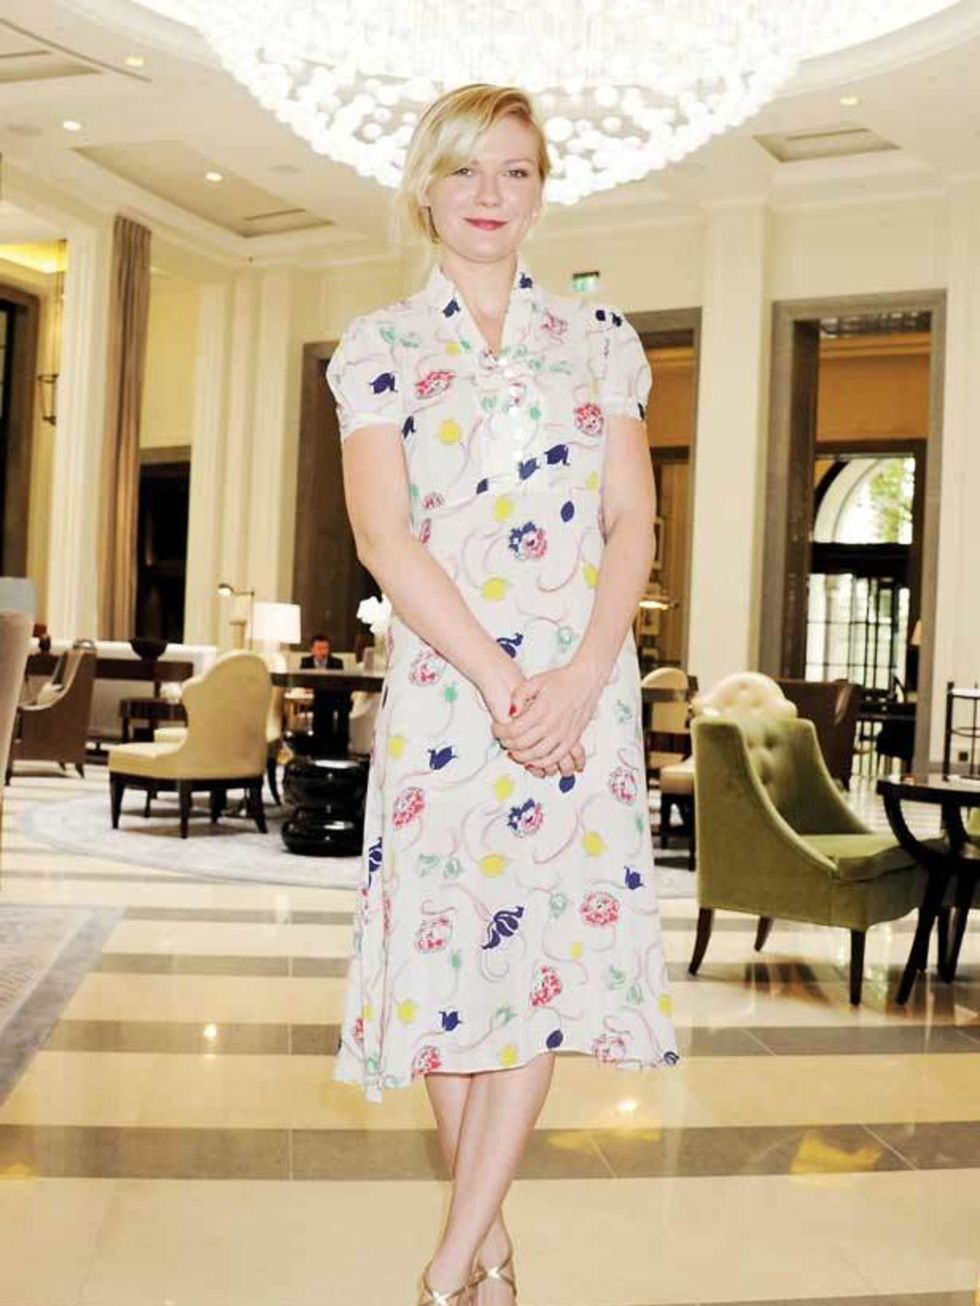 <p>Kirsten Dunst wears a <a href="http://www.elleuk.com/content/search?SearchText=floral+dress&amp;SearchButton=Search">floral</a> sundress with gold strappy sandals at the Corinthia Hotel in London, June 2011.</p>